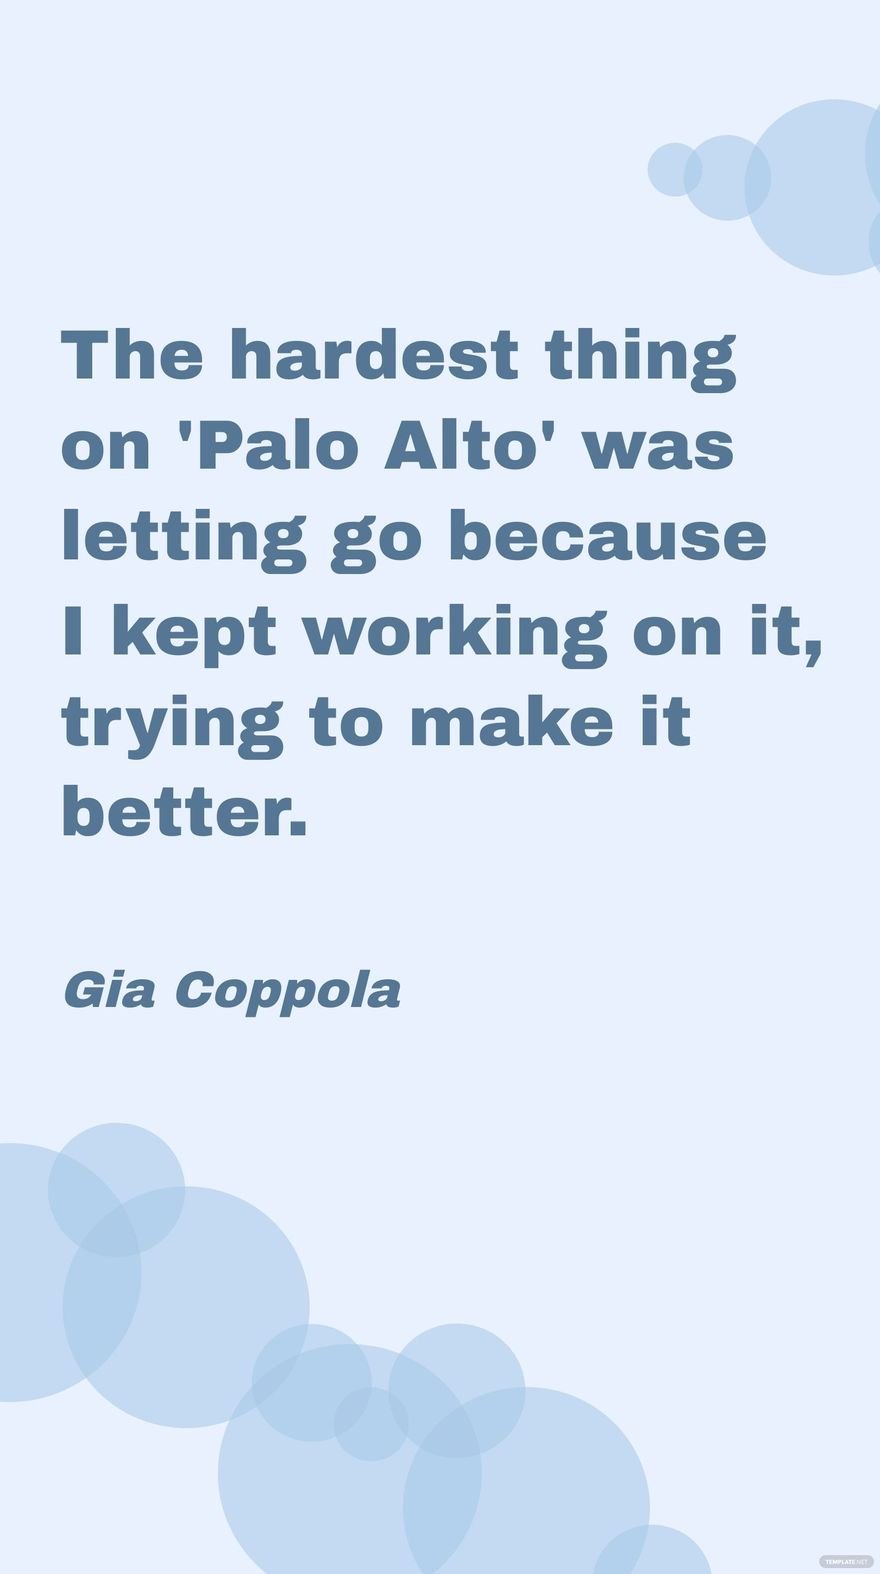 Free Gia Coppola - The hardest thing on 'Palo Alto' was letting go because I kept working on it, trying to make it better. in JPG